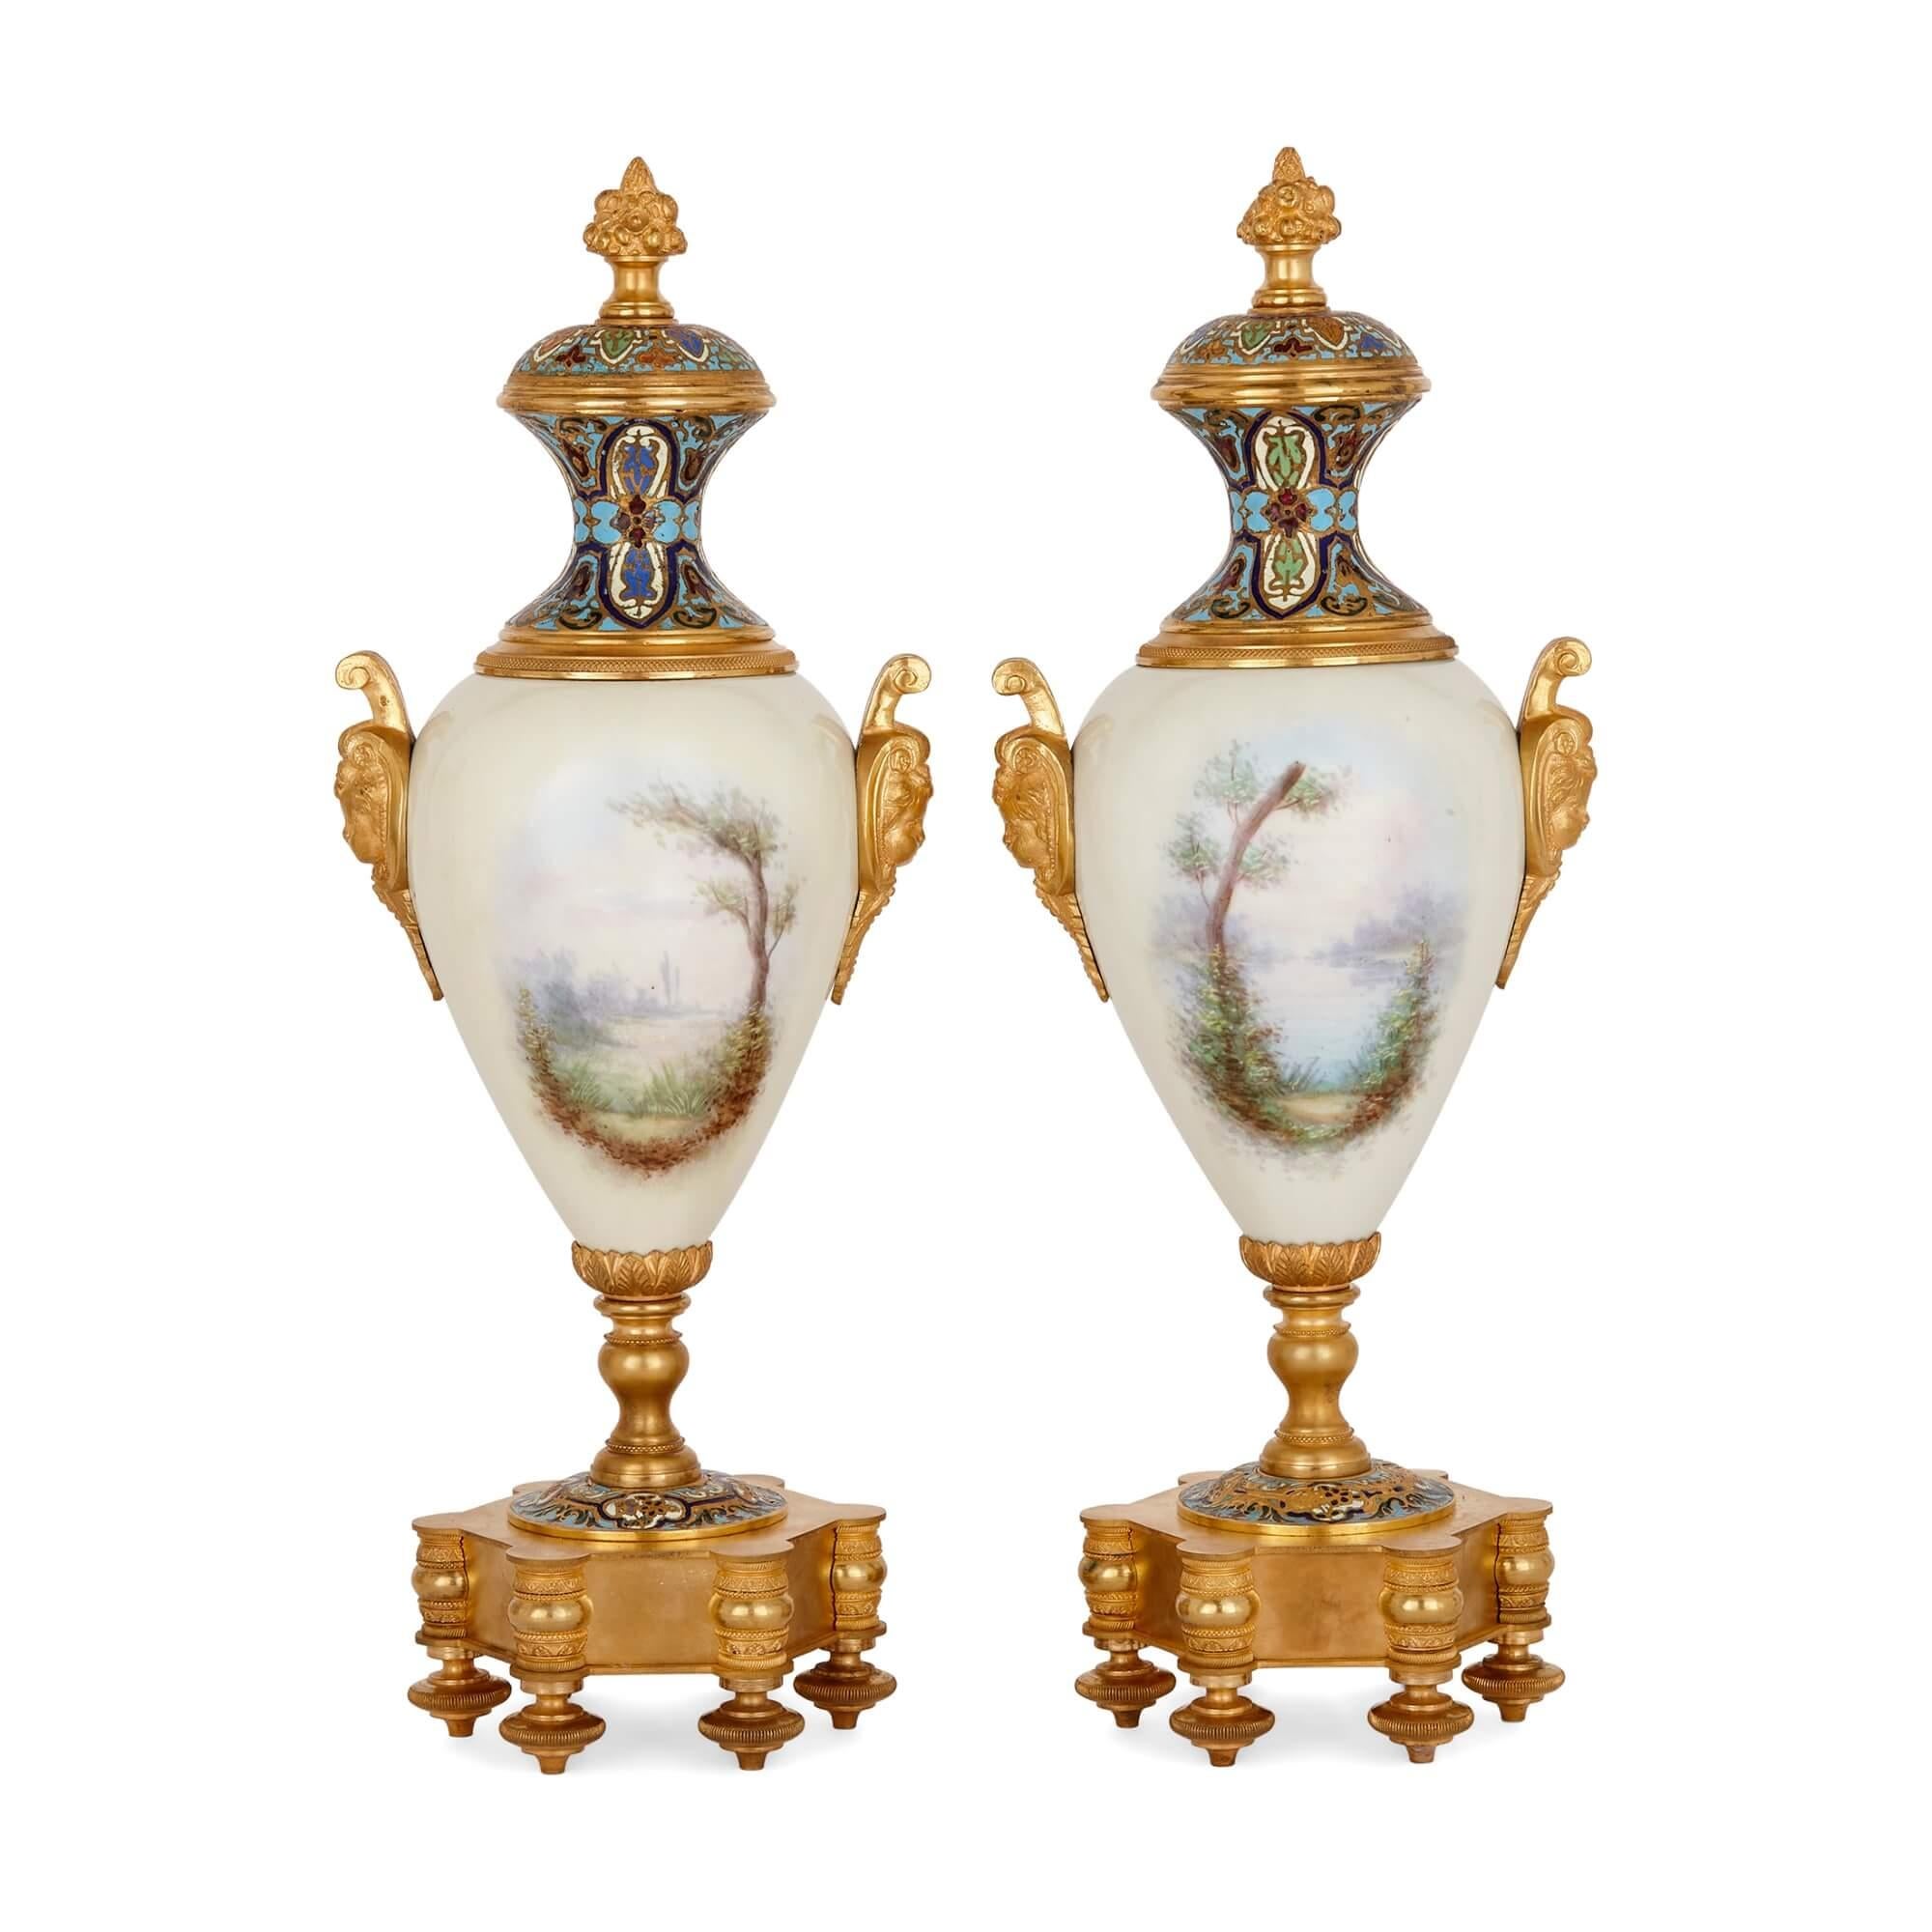 Large Three-Piece Porcelain, Champlevé Enamel, and Ormolu Mounted Clock Set For Sale 2